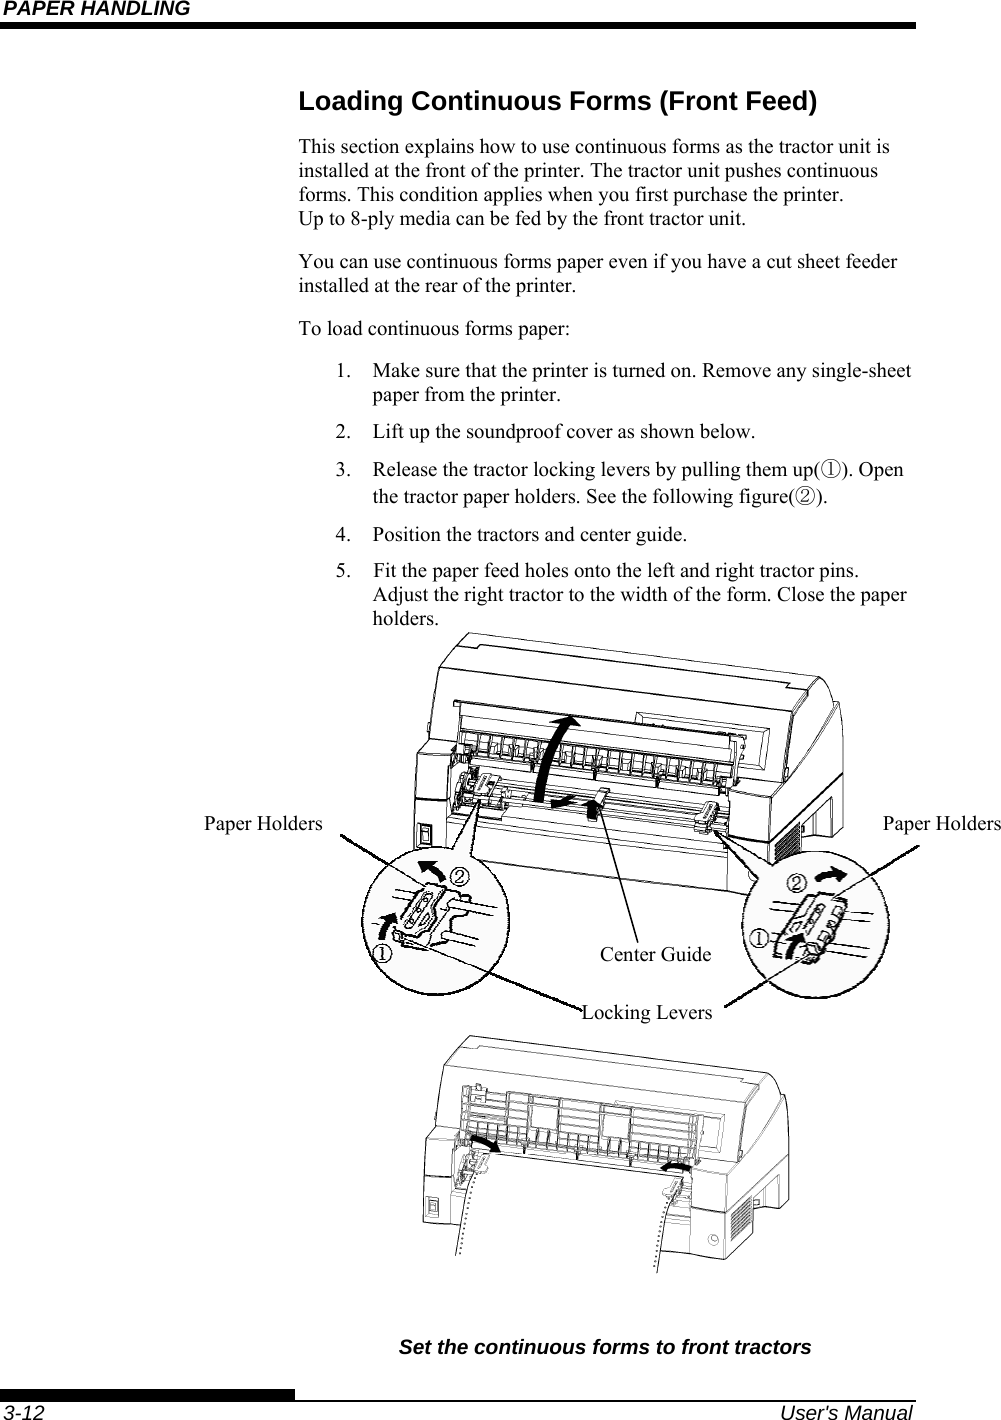 PAPER HANDLING    3-12  User&apos;s Manual Loading Continuous Forms (Front Feed) This section explains how to use continuous forms as the tractor unit is installed at the front of the printer. The tractor unit pushes continuous forms. This condition applies when you first purchase the printer. Up to 8-ply media can be fed by the front tractor unit. You can use continuous forms paper even if you have a cut sheet feeder installed at the rear of the printer. To load continuous forms paper: 1.  Make sure that the printer is turned on. Remove any single-sheet paper from the printer. 2.  Lift up the soundproof cover as shown below. 3.  Release the tractor locking levers by pulling them up(①). Open the tractor paper holders. See the following figure(②). 4.  Position the tractors and center guide. 5.    Fit the paper feed holes onto the left and right tractor pins.  Adjust the right tractor to the width of the form. Close the paper holders.                 Set the continuous forms to front tractors  Paper Holders  Paper Holders Locking Levers Center Guide 